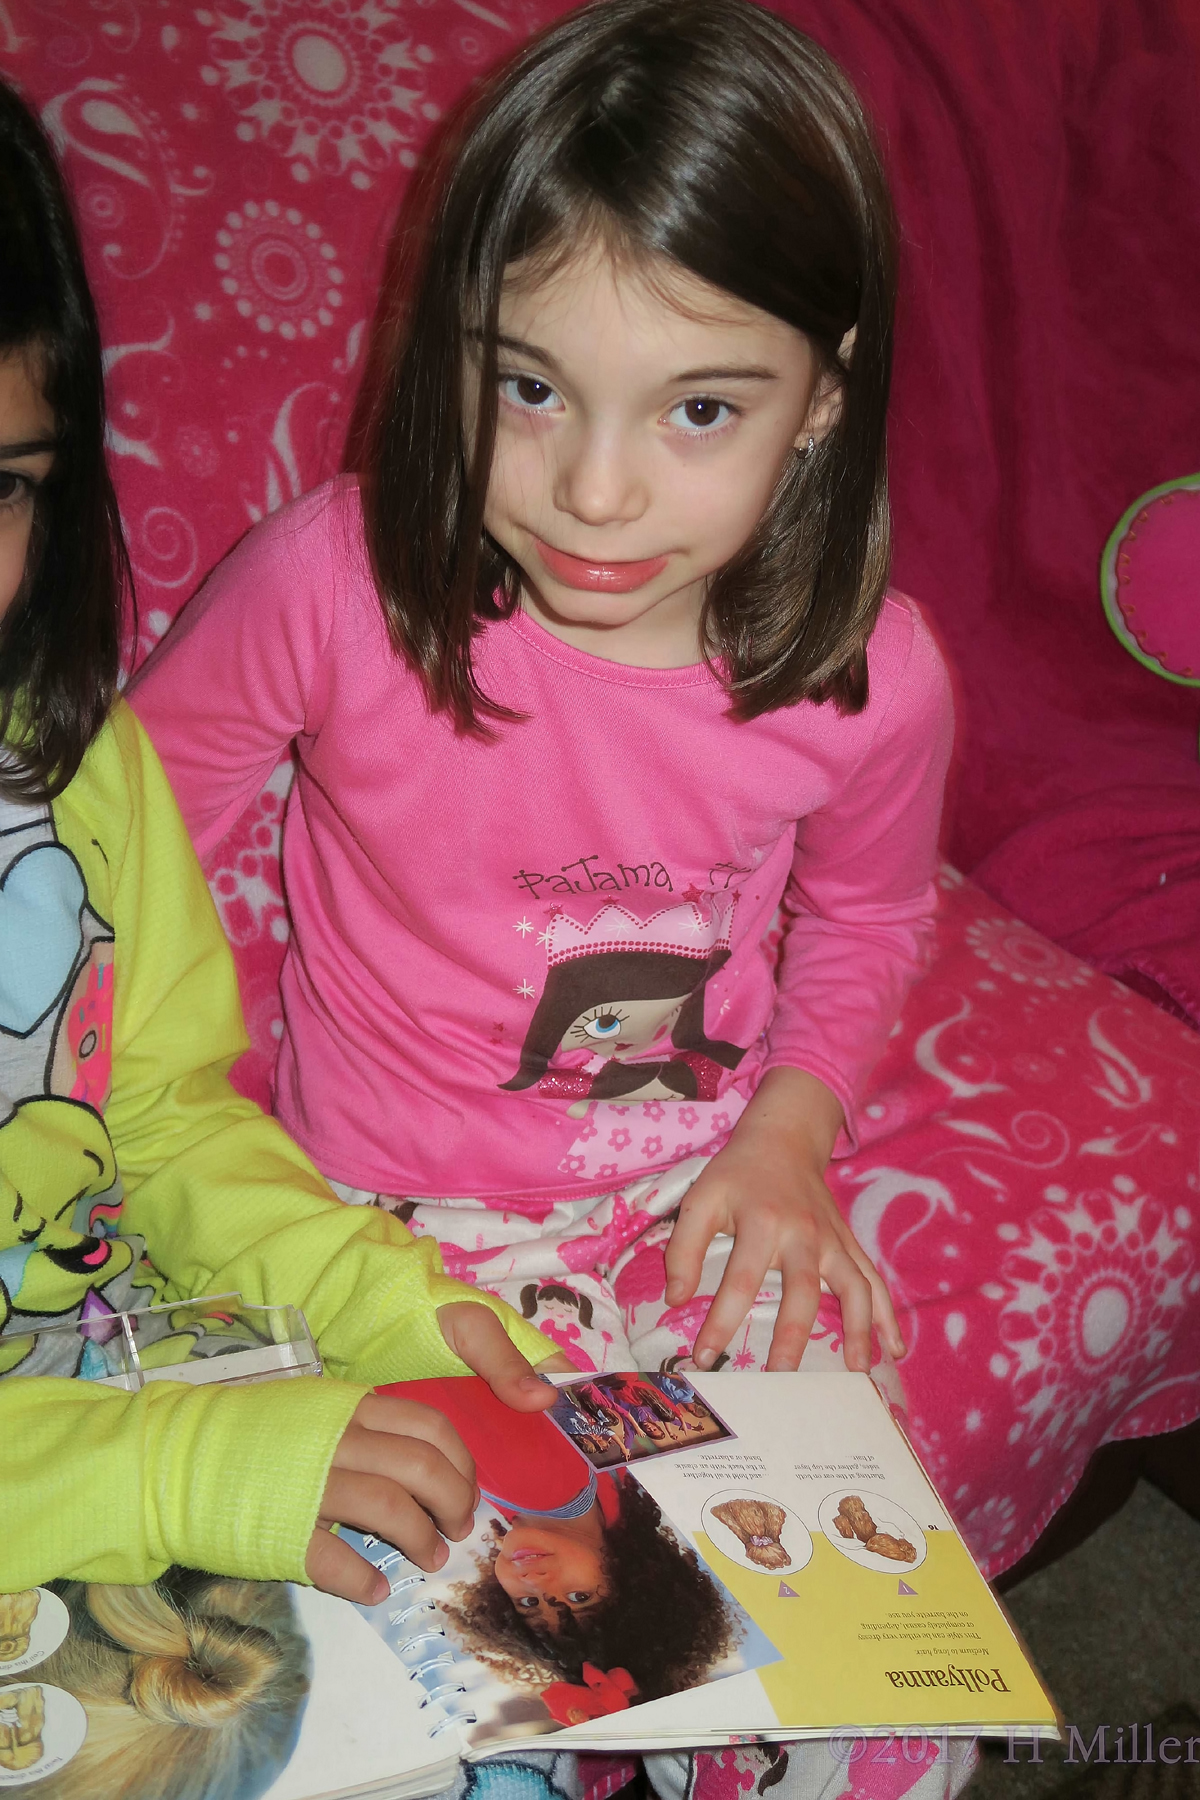 Madison Reading The Girls Hairstyles Book. 